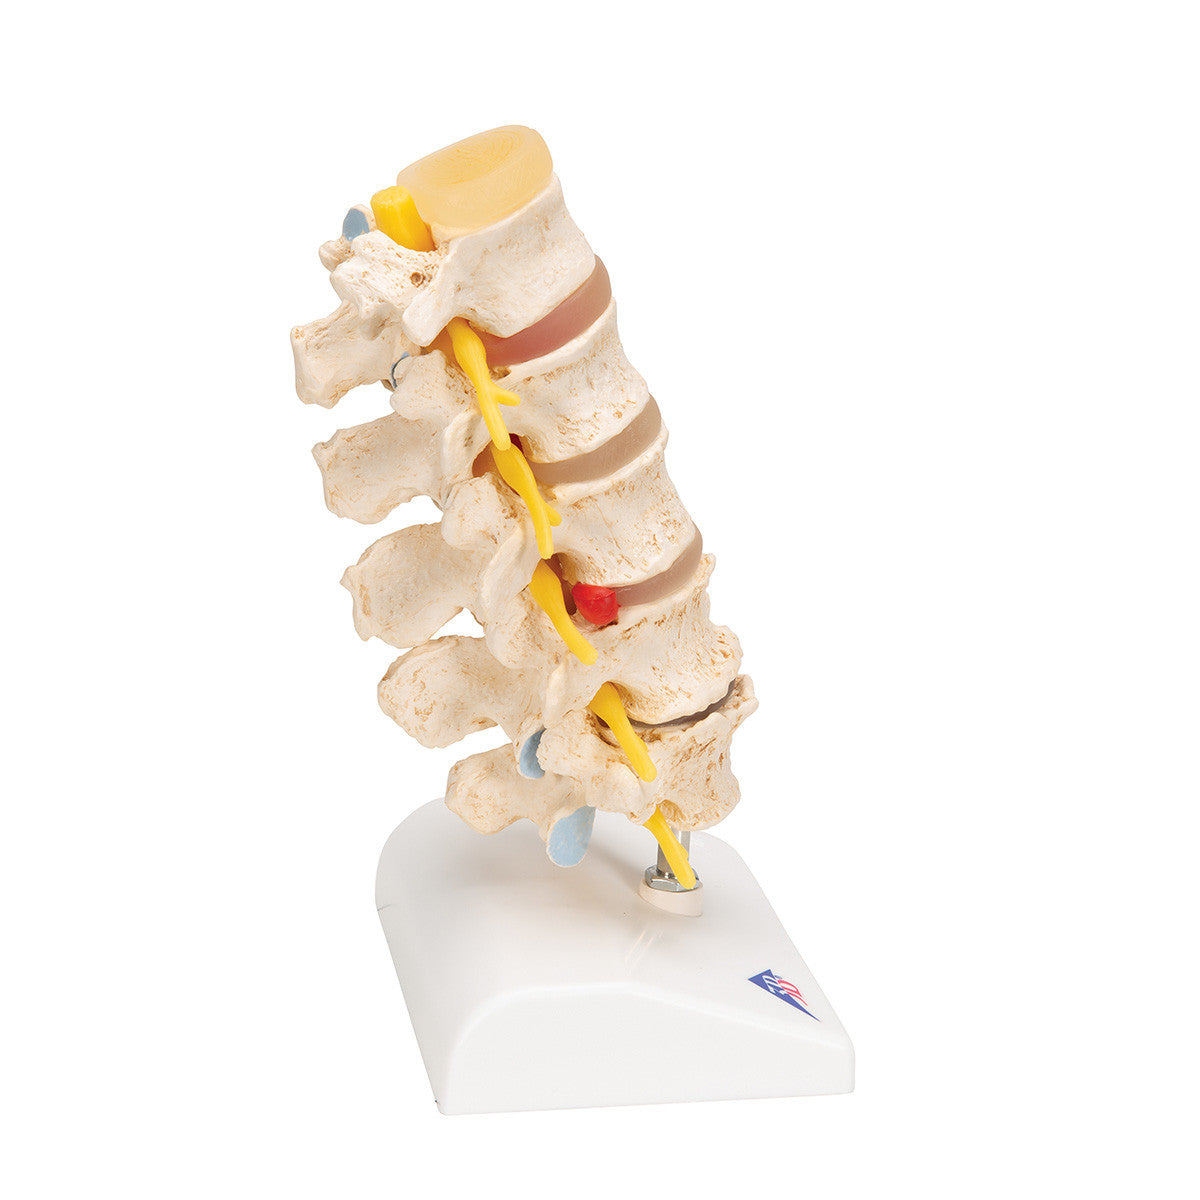 a795_03_1200_1200_stages-of-disc-prolapse-and-vertebral-degeneration-3b-smart-anatomy__78490.1589753278.1280.1280.jpg